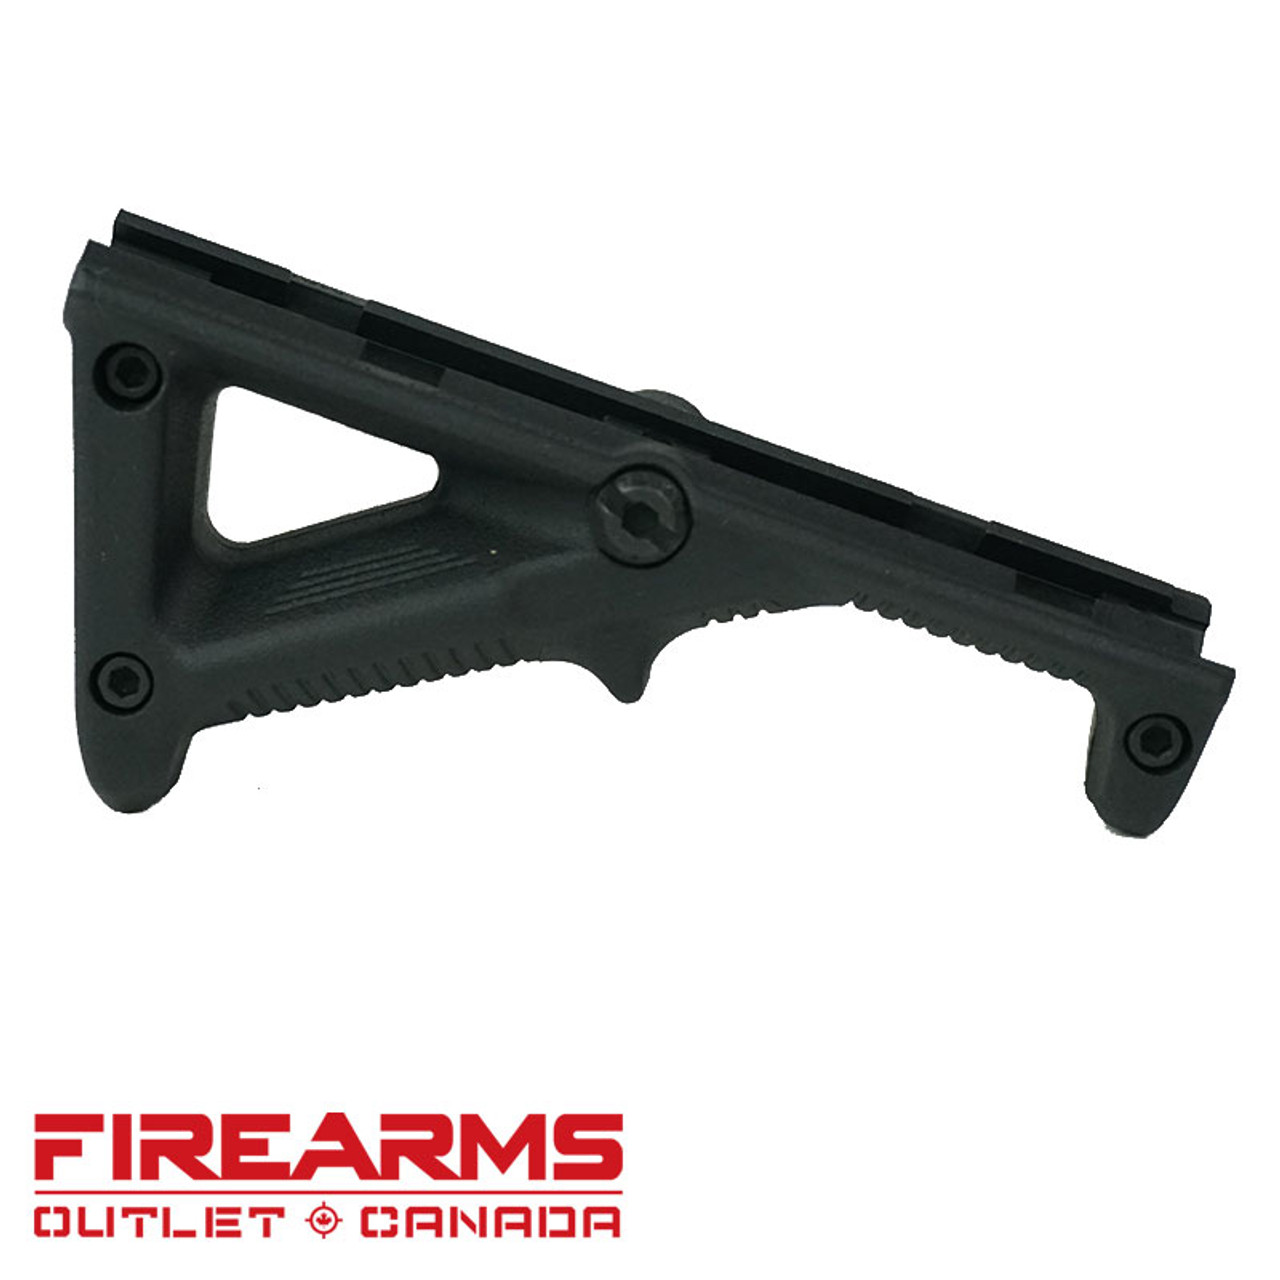 Magpul AFG2 - Angled Fore Grip, Black